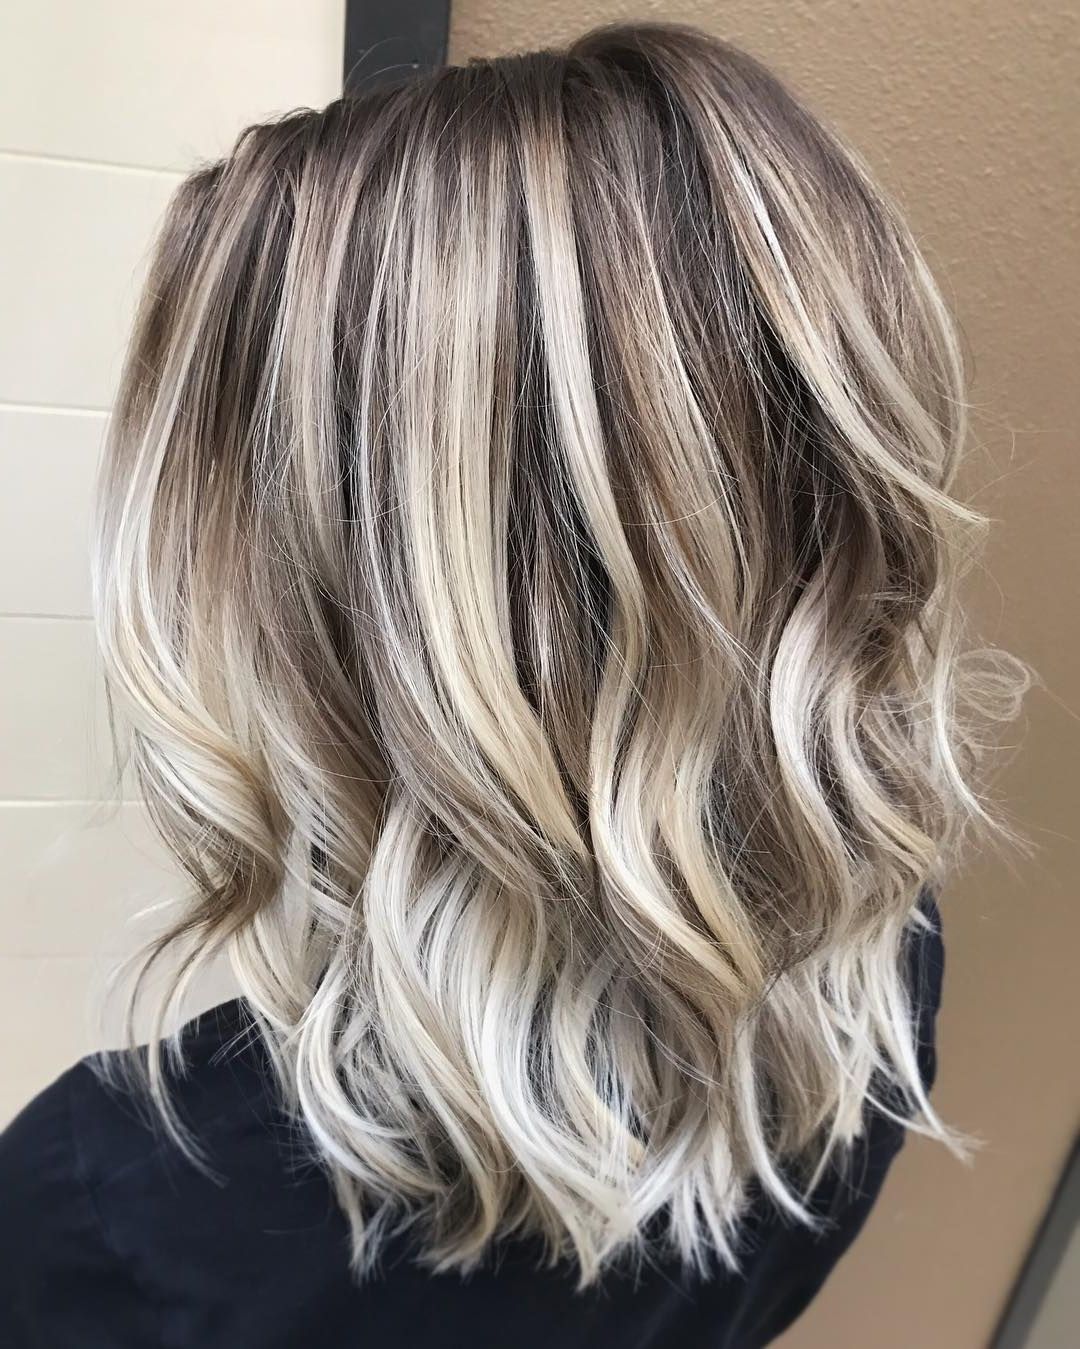 Famous Feathered Ash Blonde Hairstyles Within 10 Ash Blonde Hairstyles For All Skin Tones, 2018 Best Hair Color Trends (Gallery 2 of 20)